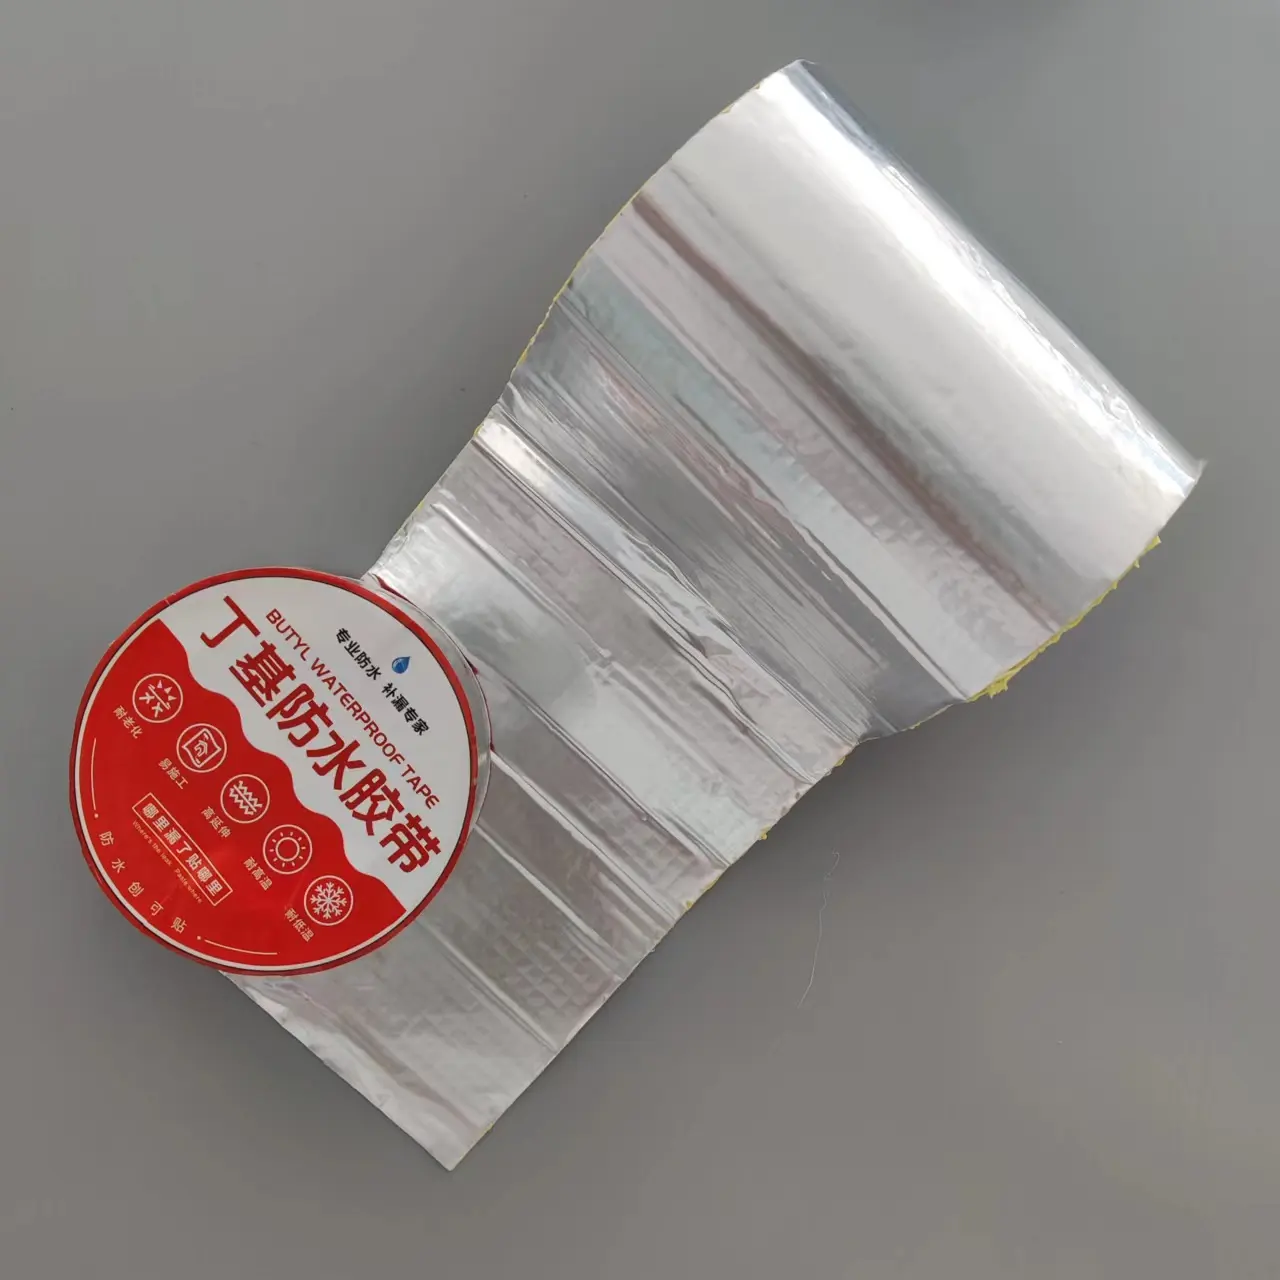 Widely-Used Flashband Waterproof Tape